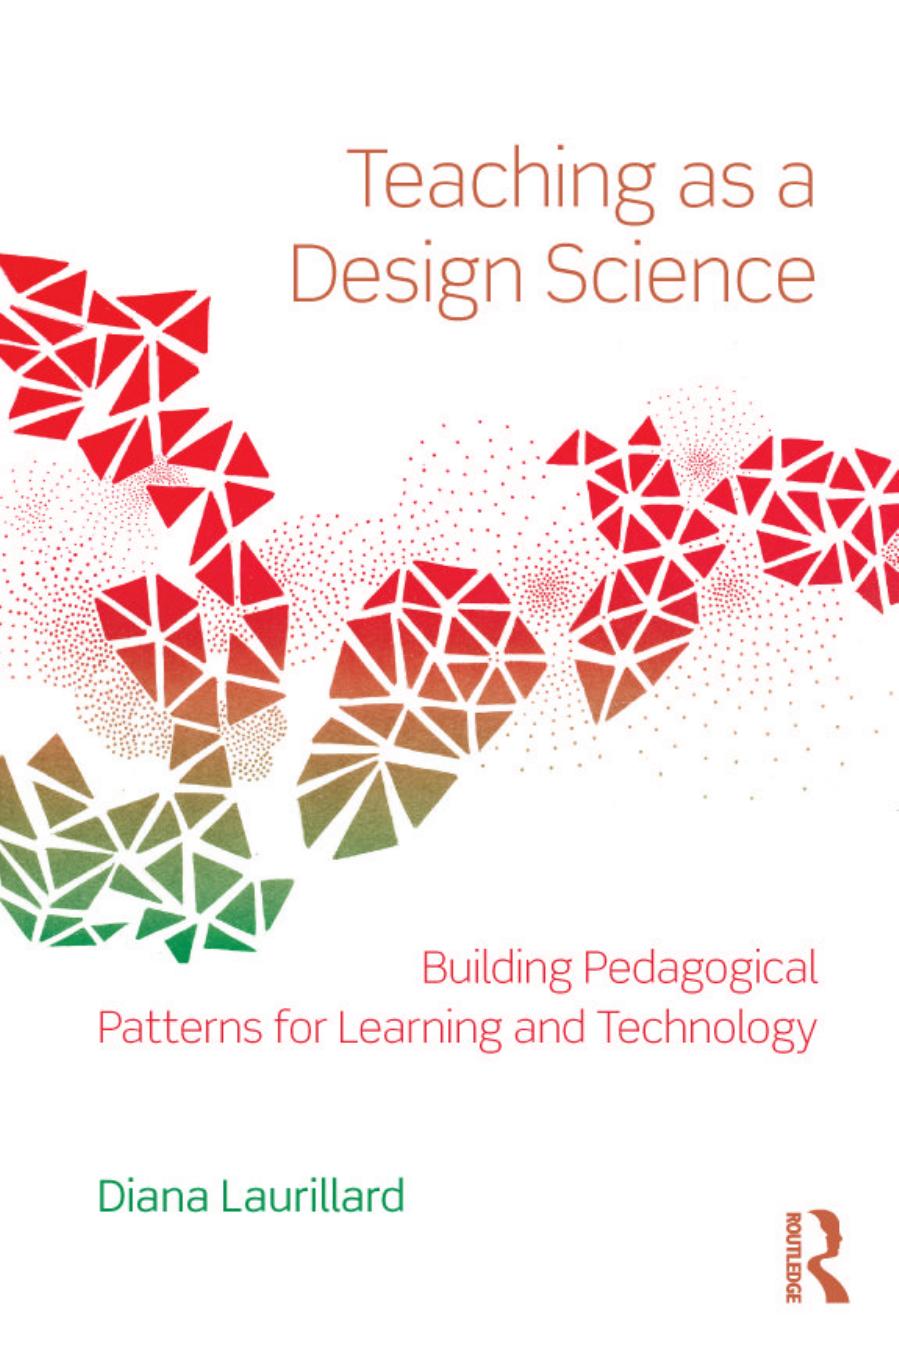 Teaching as a Design Science: Building Pedagogical Patterns for Learning and Technology by Diana Laurillard